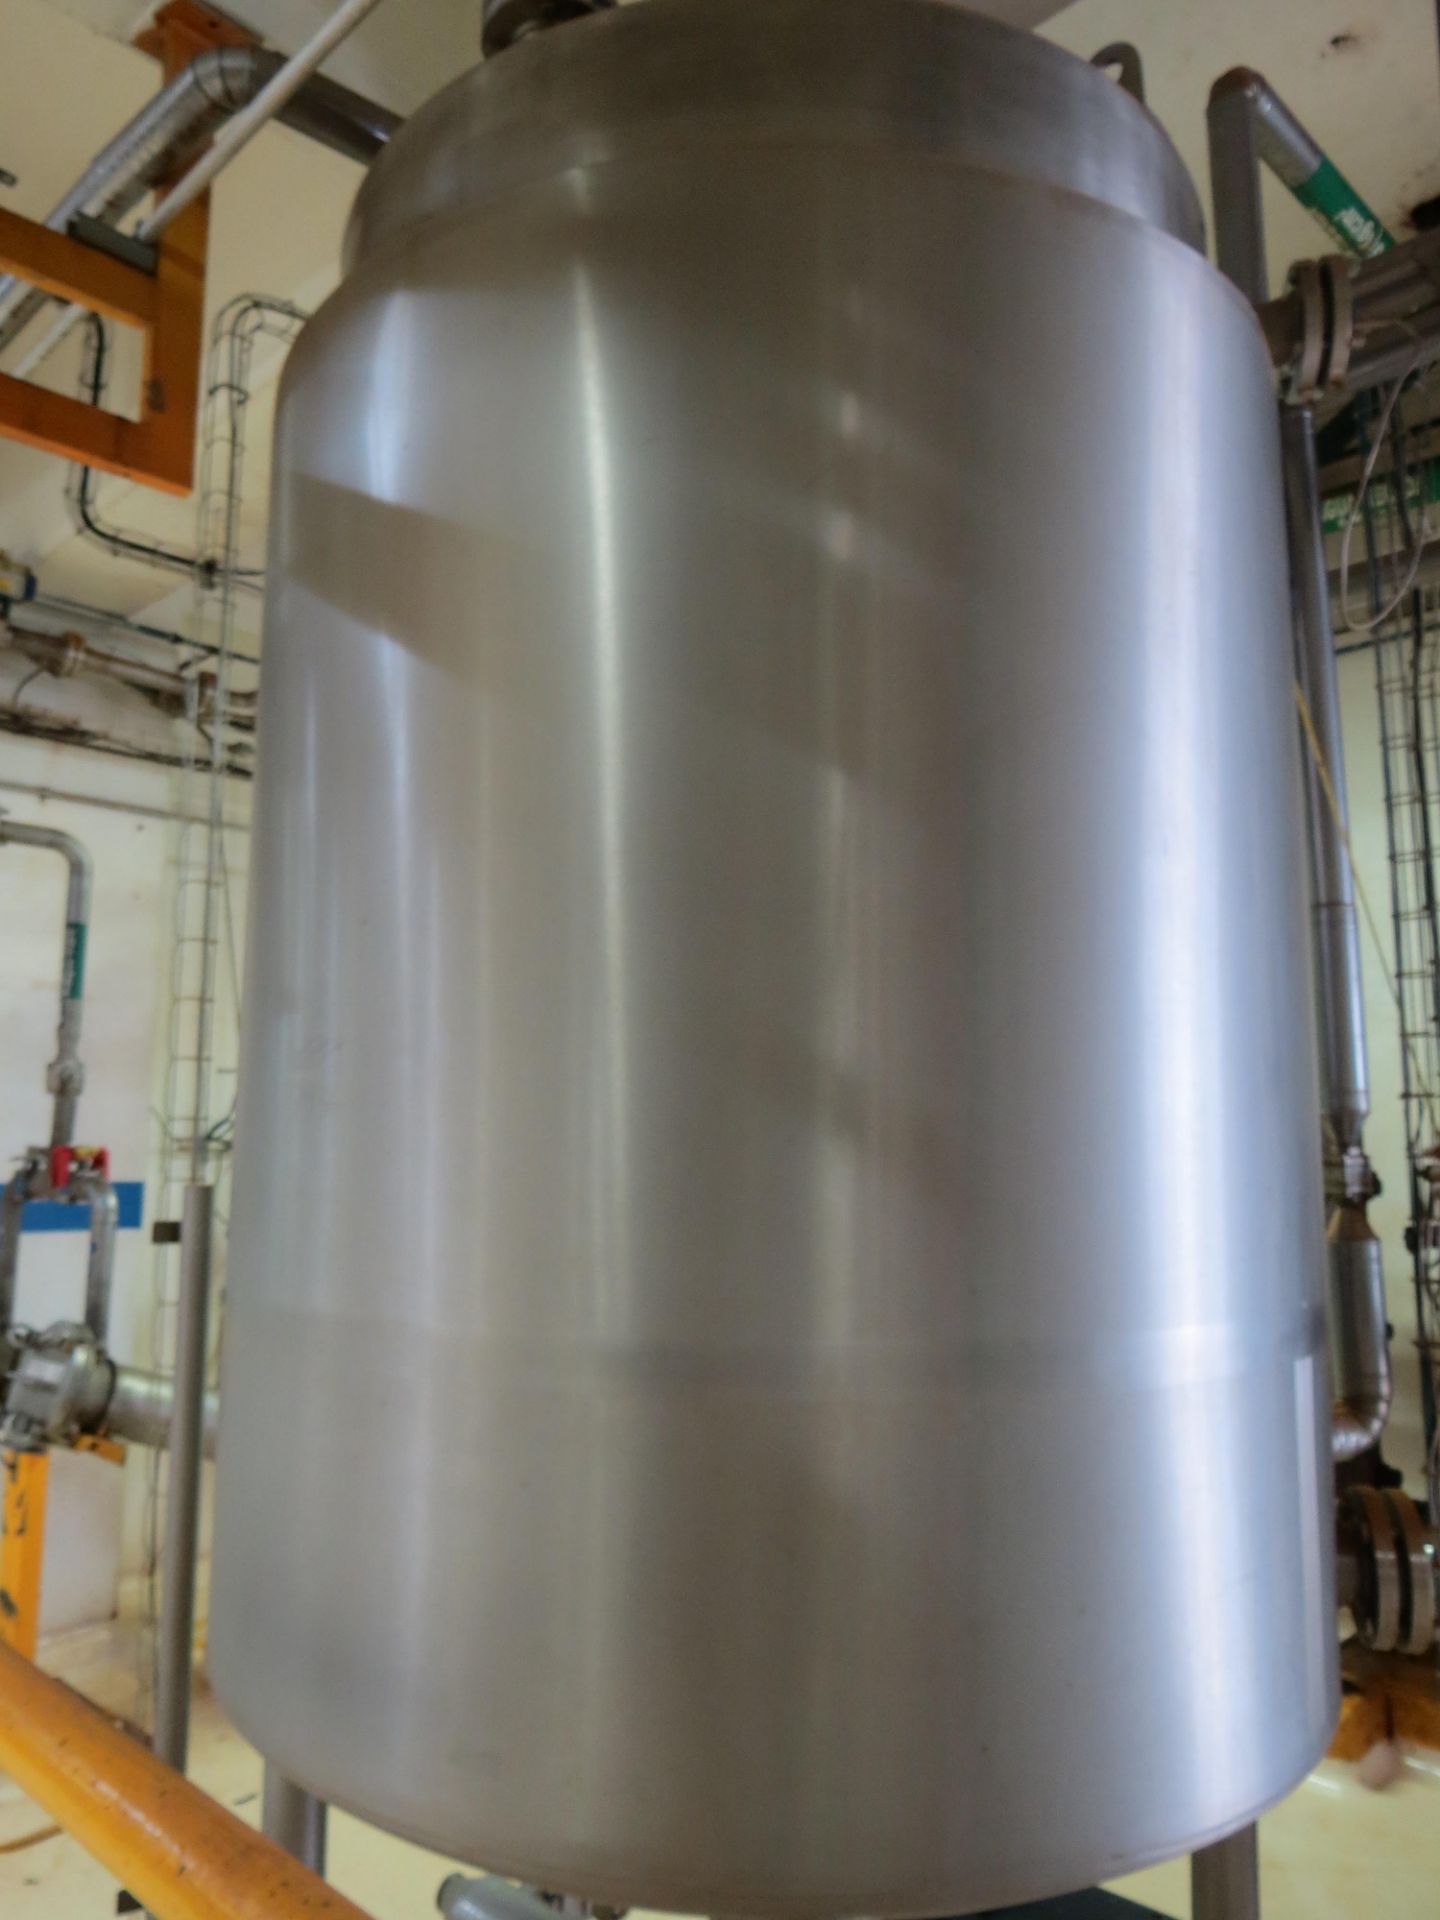 Jacketed S/S Tank 2 m high X 1.50 m Diameter - Image 3 of 16